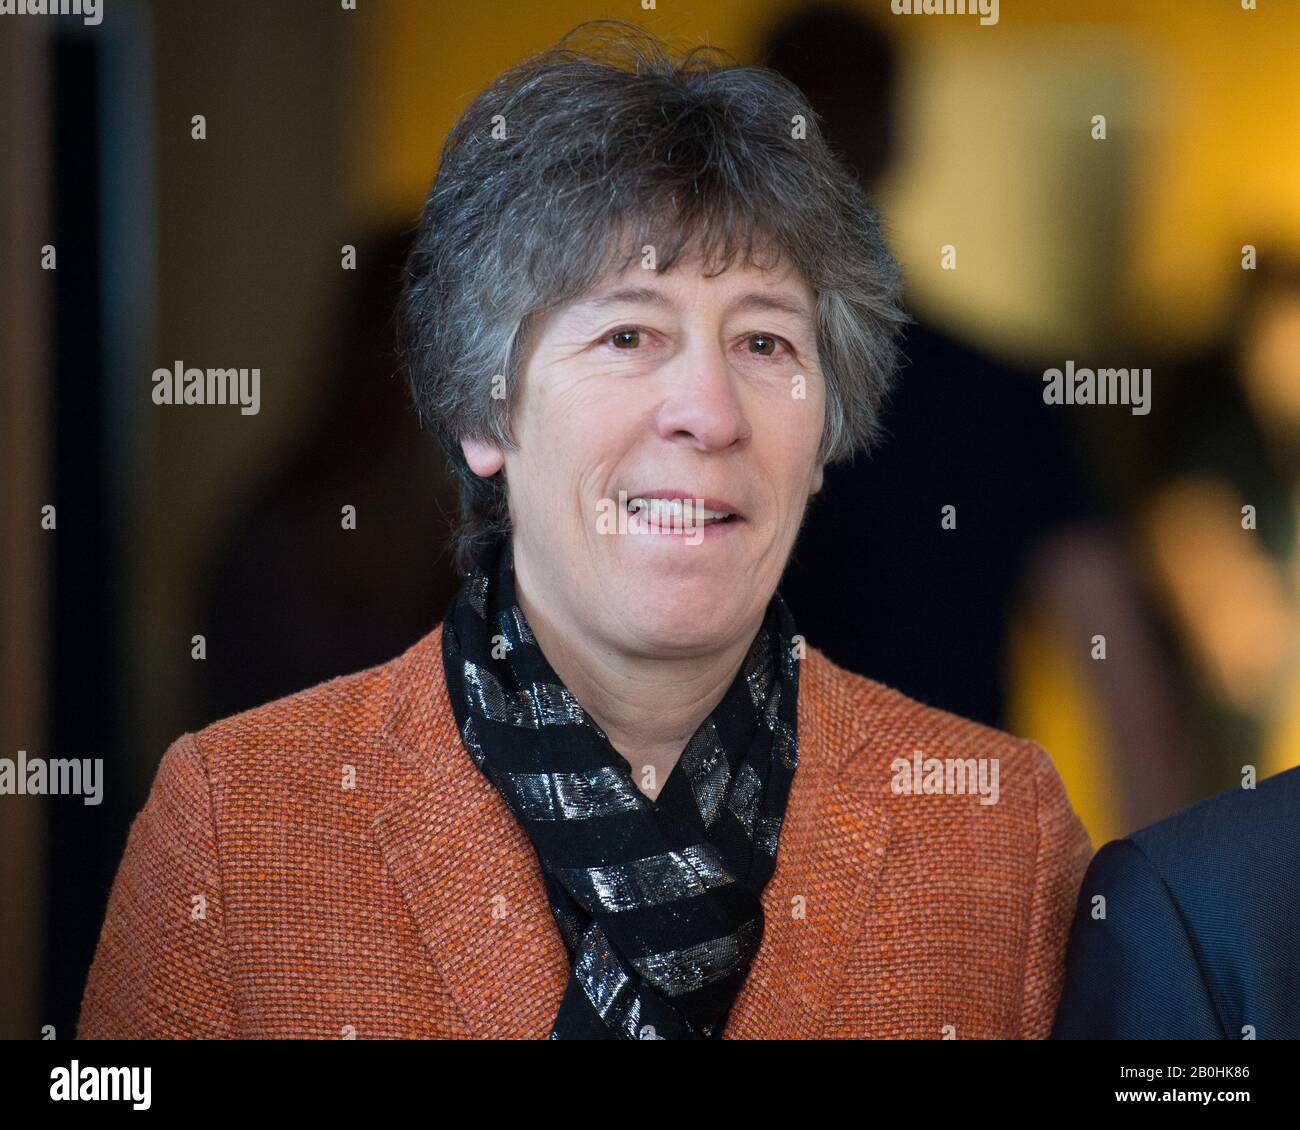 Edinburgh, UK. 20th Feb, 2020. Scenes from the Scottish Parliament. Liz Smith MSP - New Scottish Tory Party Cheif Whip. Credit: Colin Fisher/Alamy Live News Stock Photo